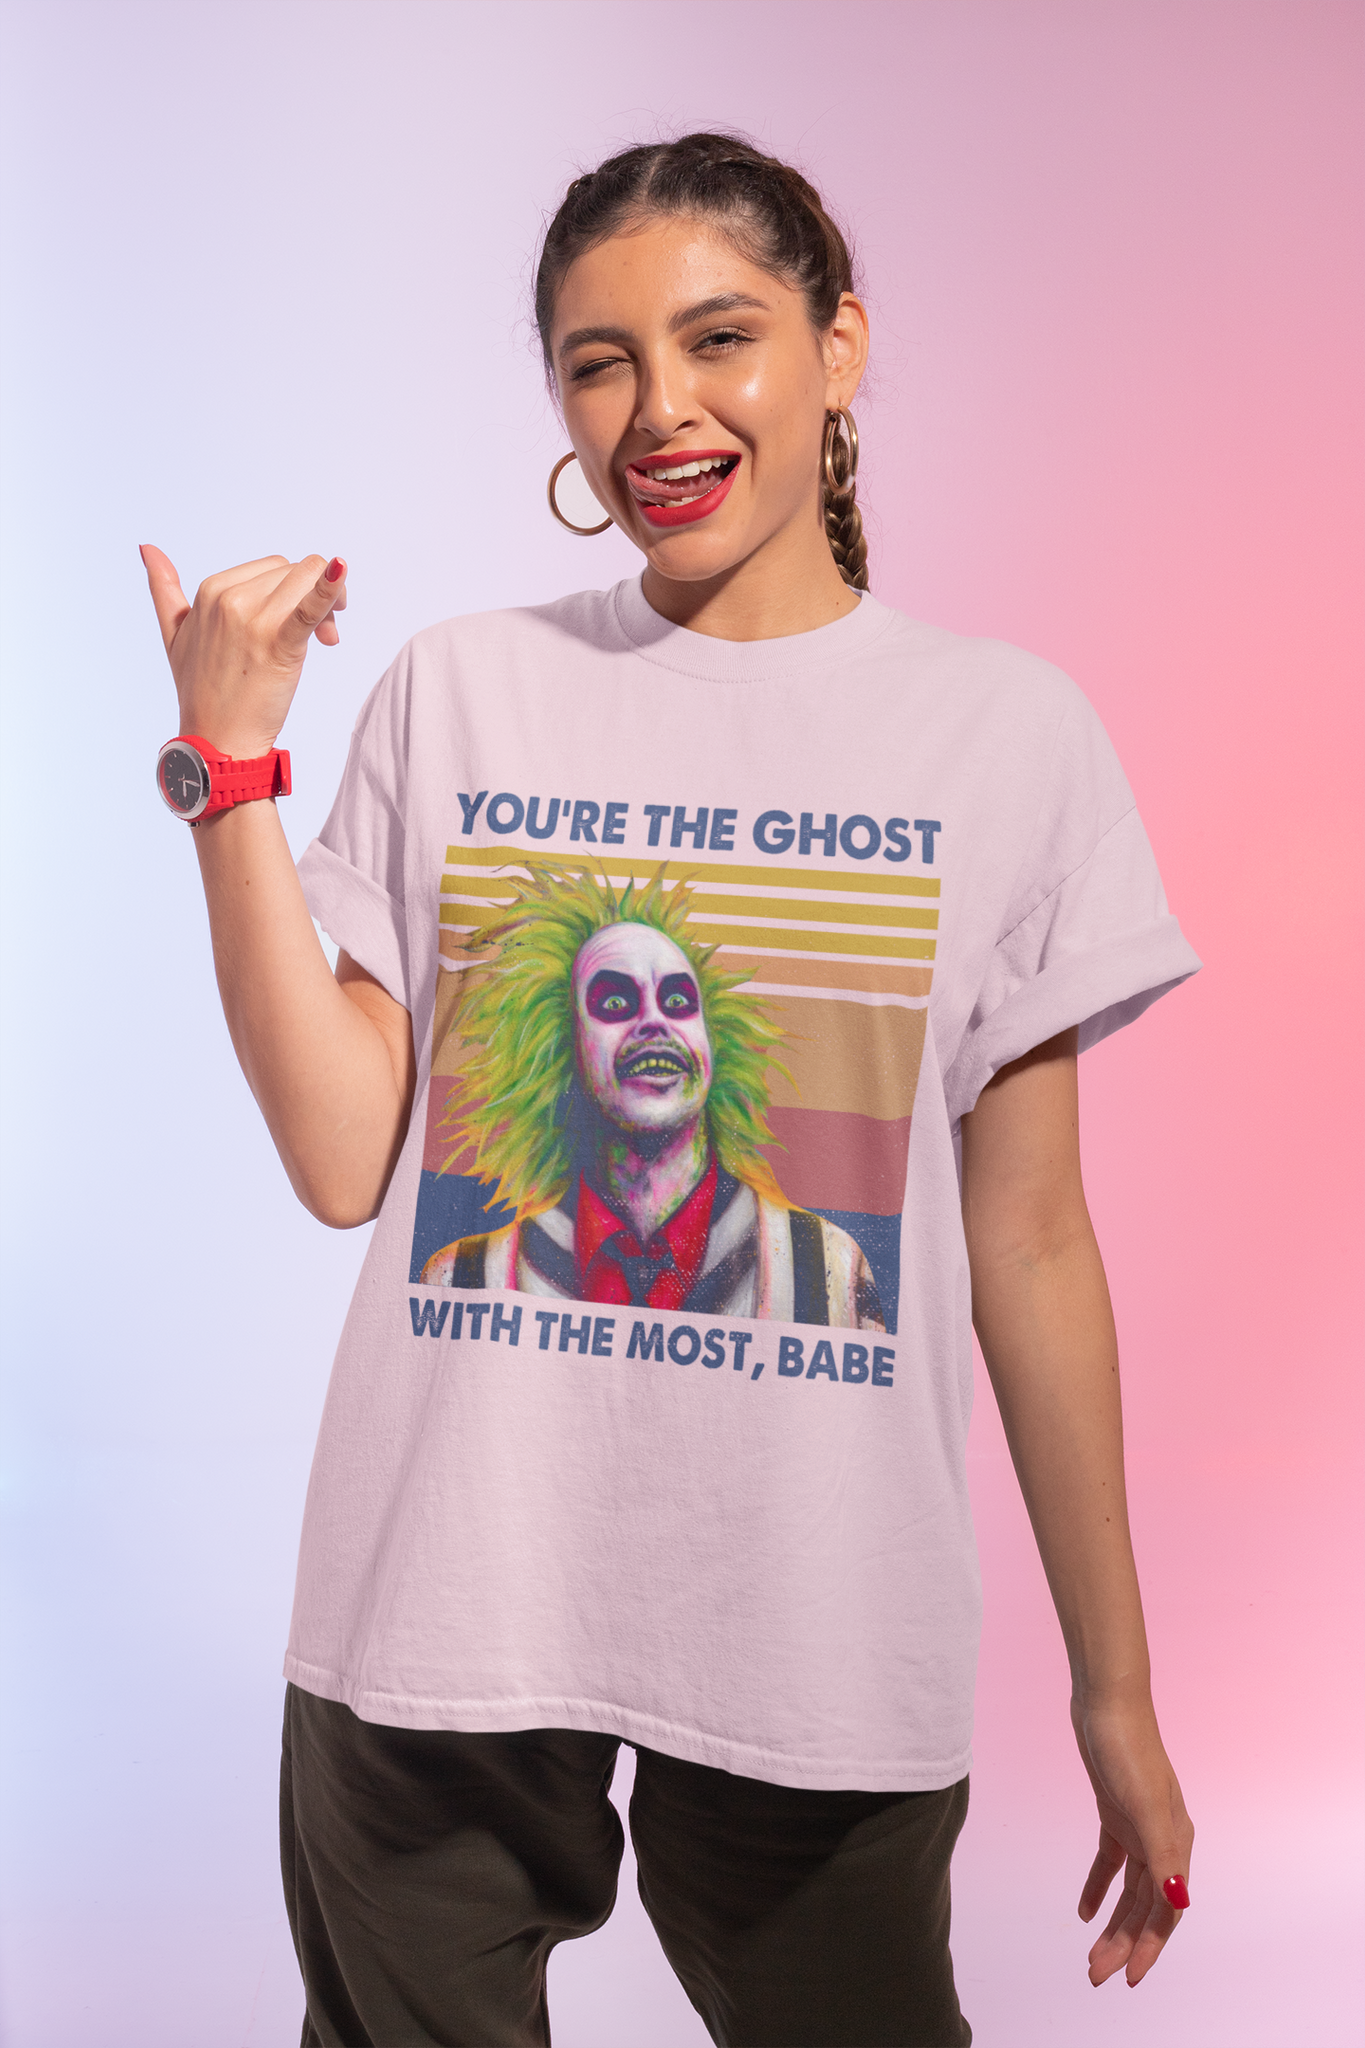 Beetlejuice Vintage Tshirt, Youre The Ghost With The Most Babe T Shirt, Halloween Gifts